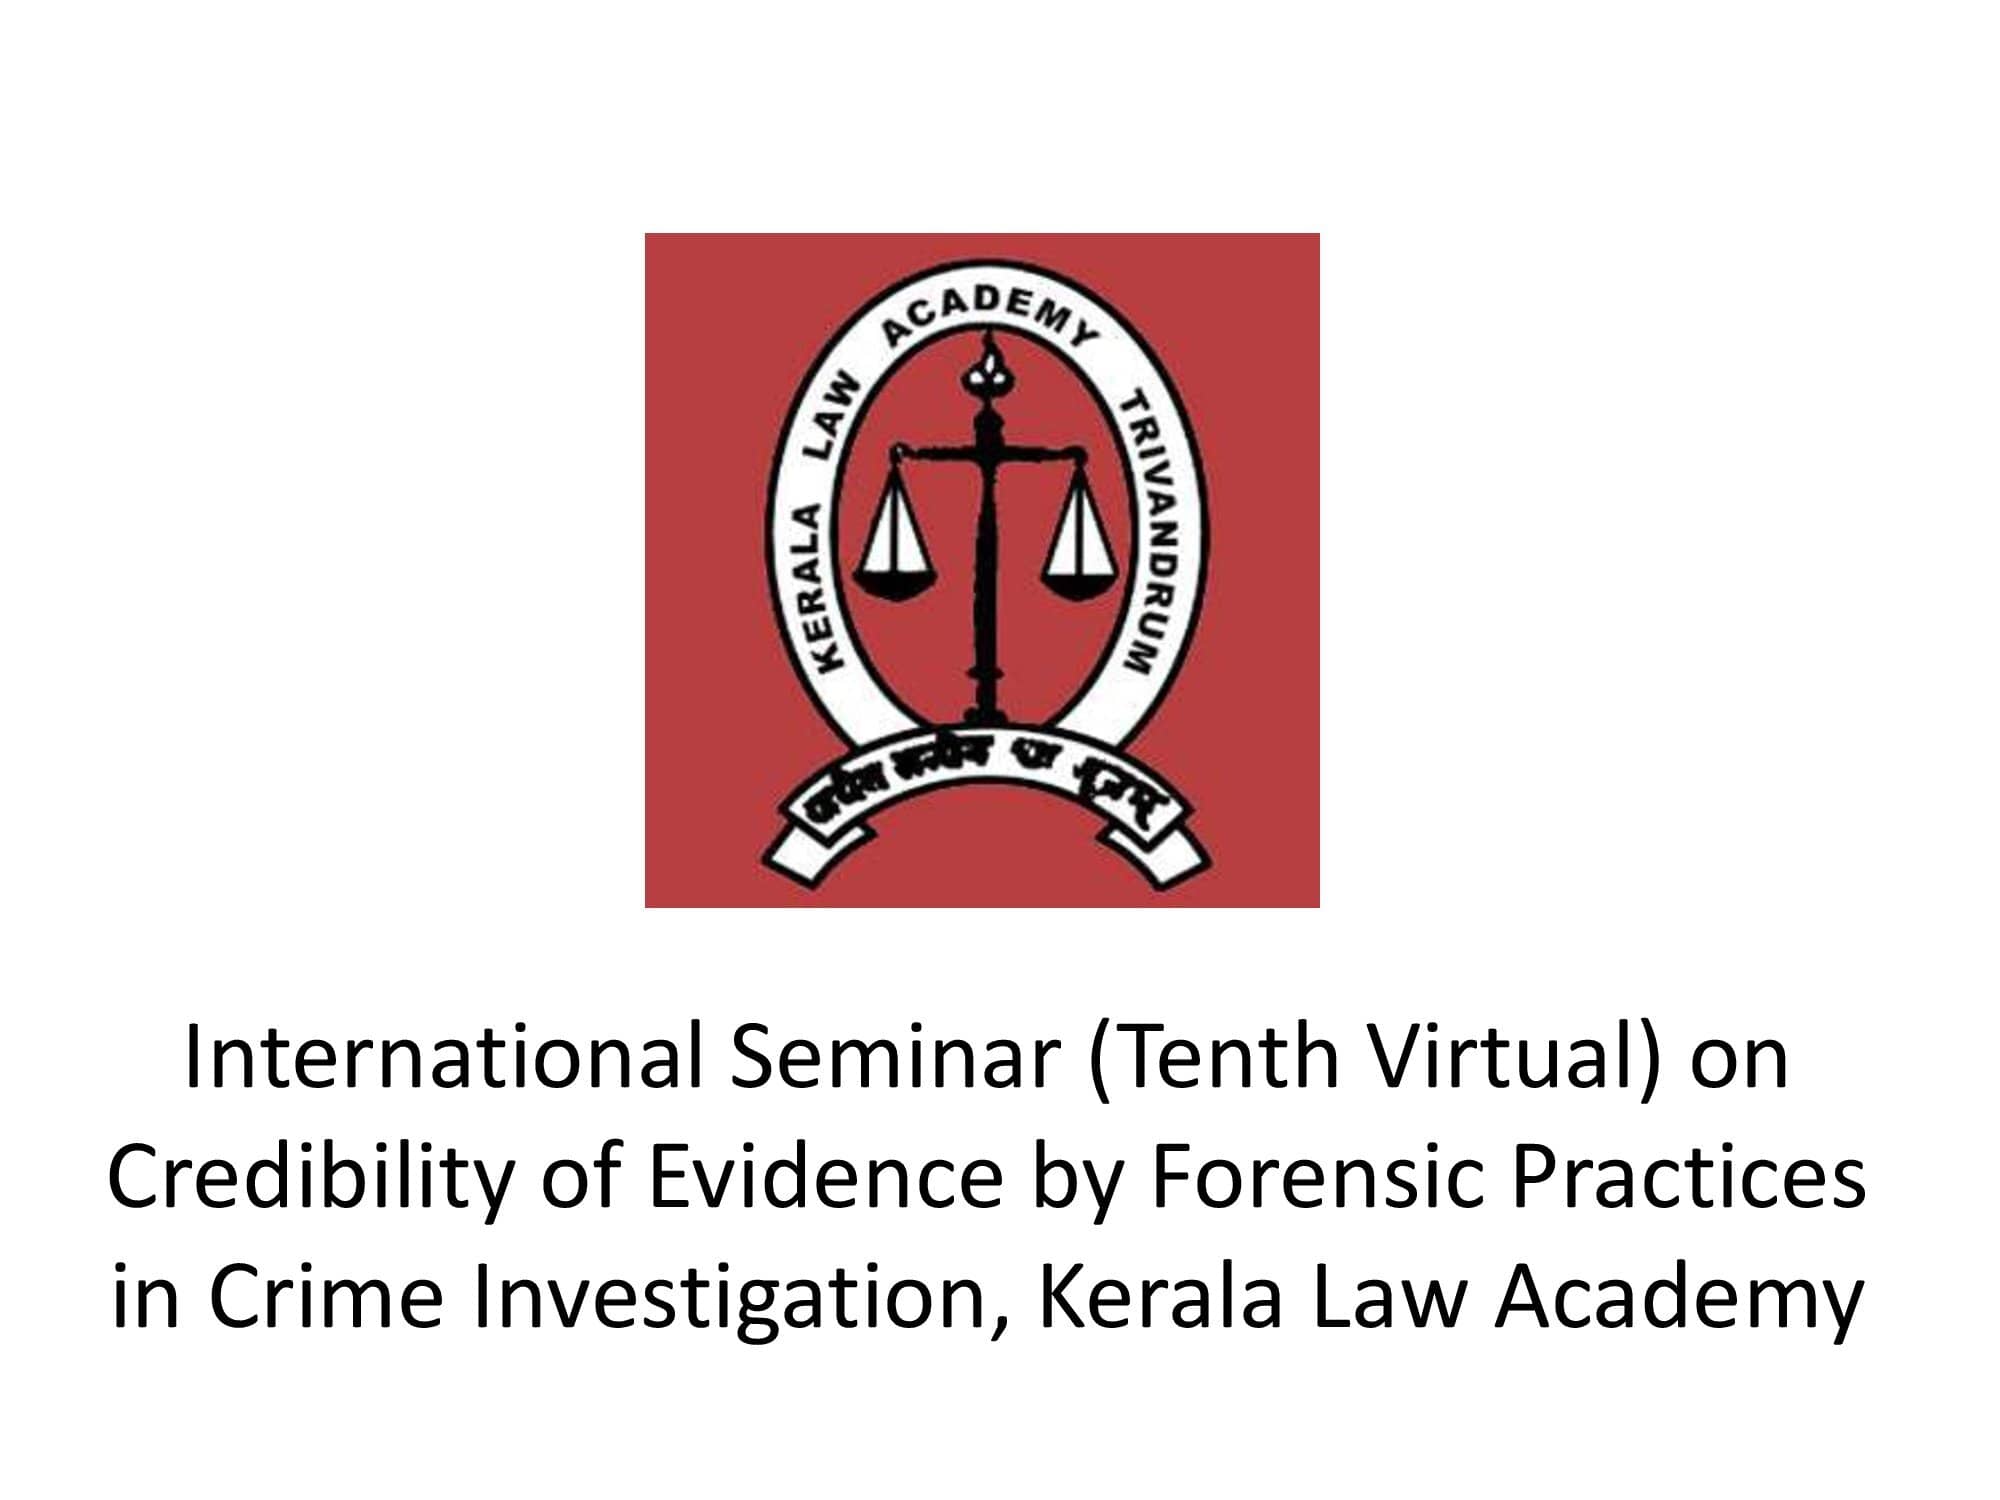 International Seminar (Tenth Virtual) on Credibility of Evidence by Forensic Practices in Crime Investigation, Kerala Law Academy